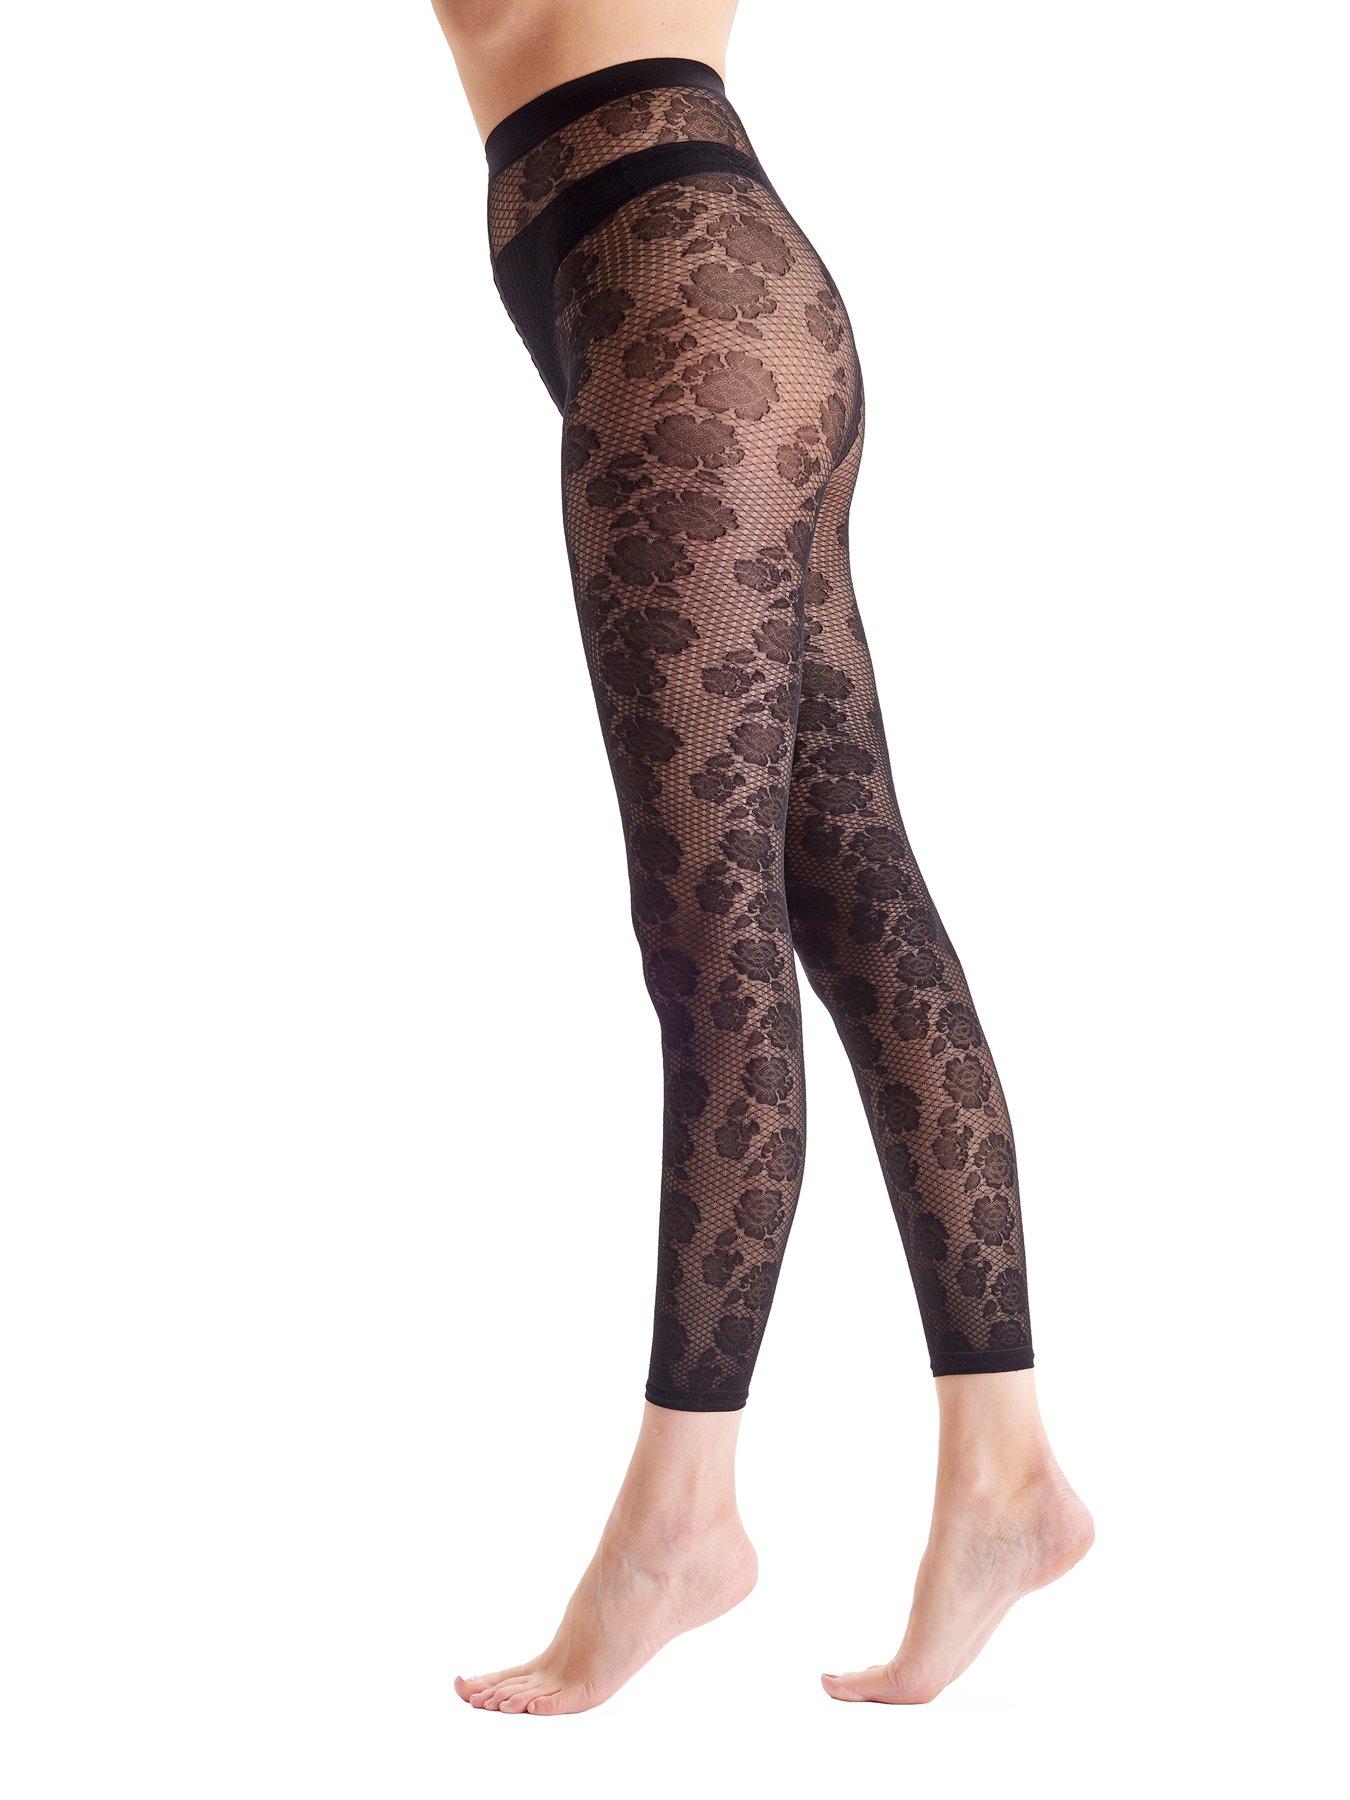 Footless Lace Tights, all Tights